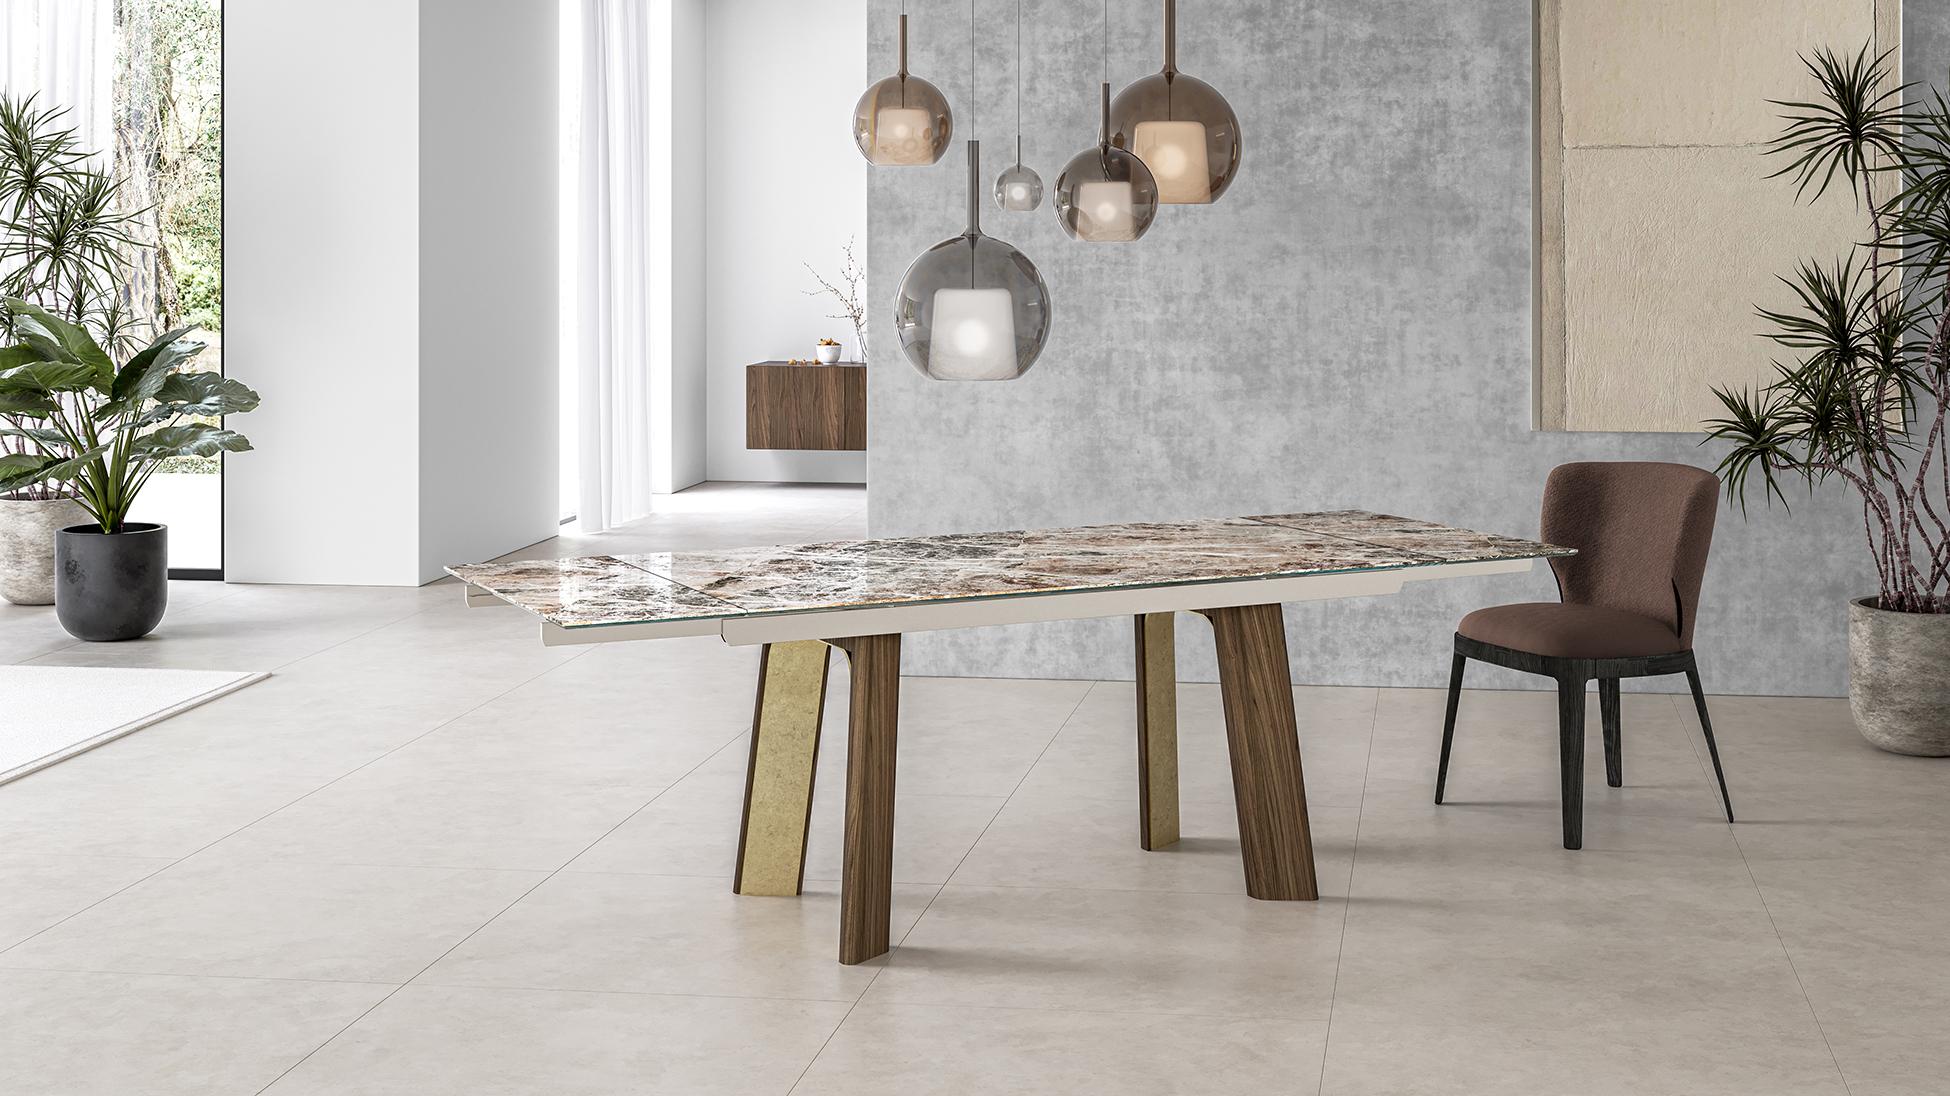 Afrodite Allungabile Dining Table by Chinellato Design
Dimensions: W 200 x D 100 x H 81.6 cm 
Extendable + 40 / + 40 cm
Materials: 
Top: Glossy Ceramic Moutain Peak, under top: Extra Clear Tempered Glass, binario track: Aluminum Bronzino 25
Base: